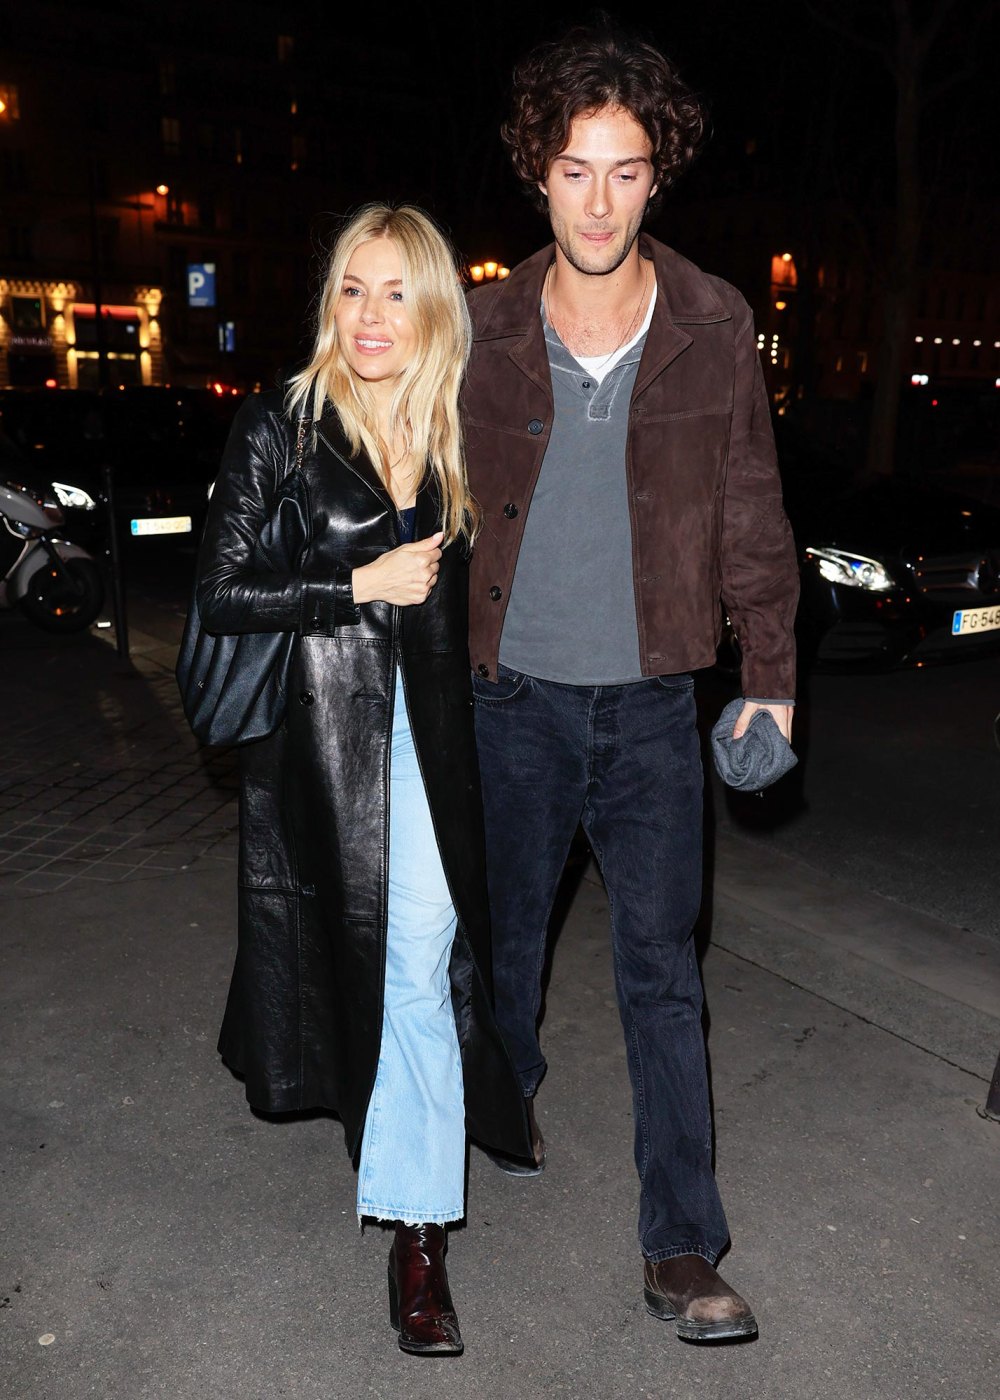 Sienna Miller and boyfriend Oli Green are stepping out months after welcoming their baby